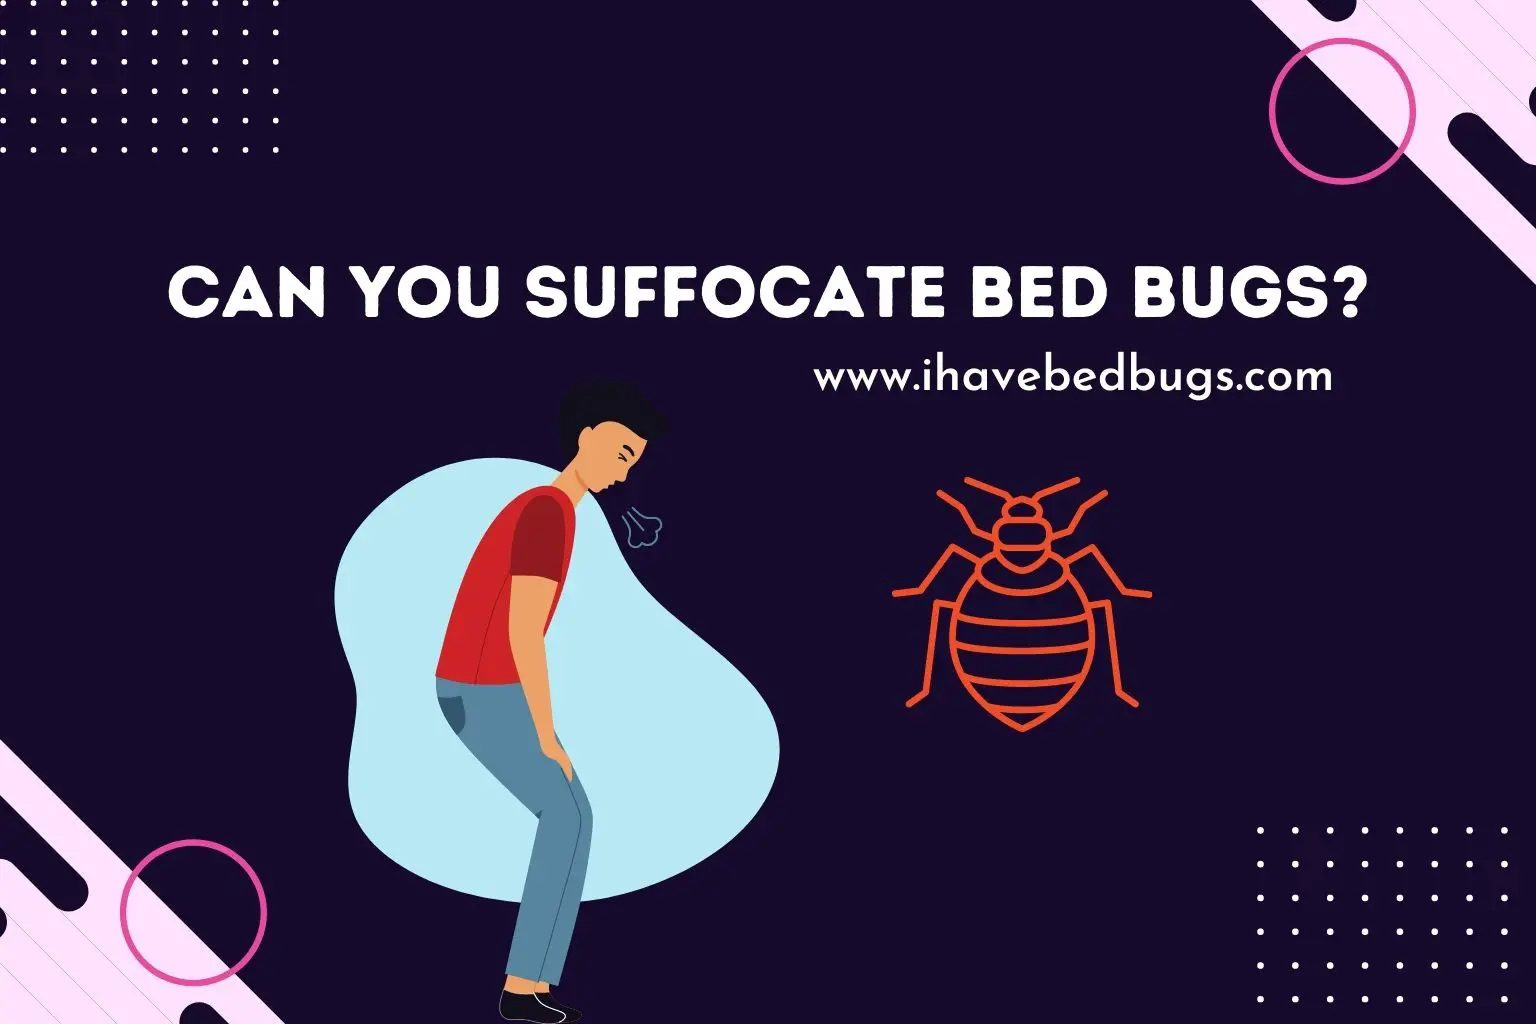 How to Avoid Bed Bugs on Your Next Trip - Bob Vila